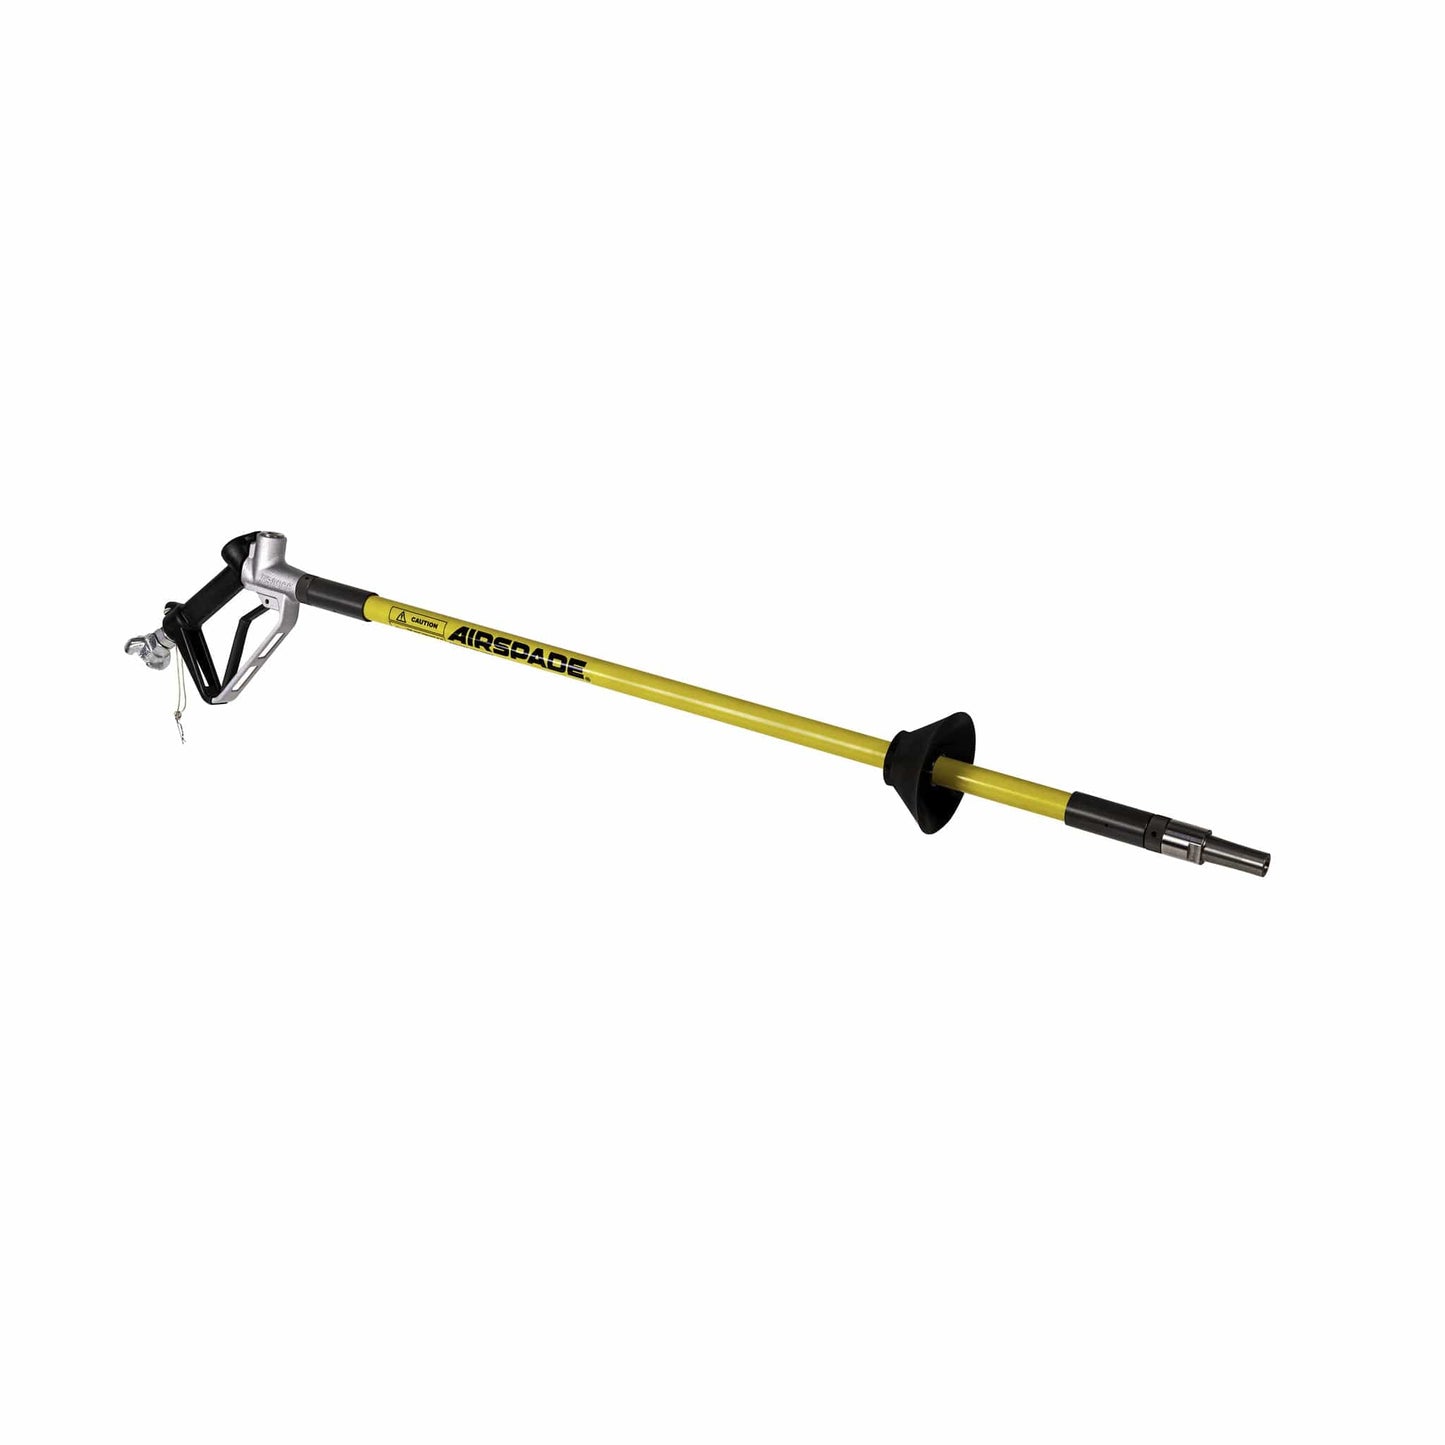 AirSpade 2000 Construction Kit - 150 cfm with 4 Ft Barrel & 3 Ft Extension (HT106)